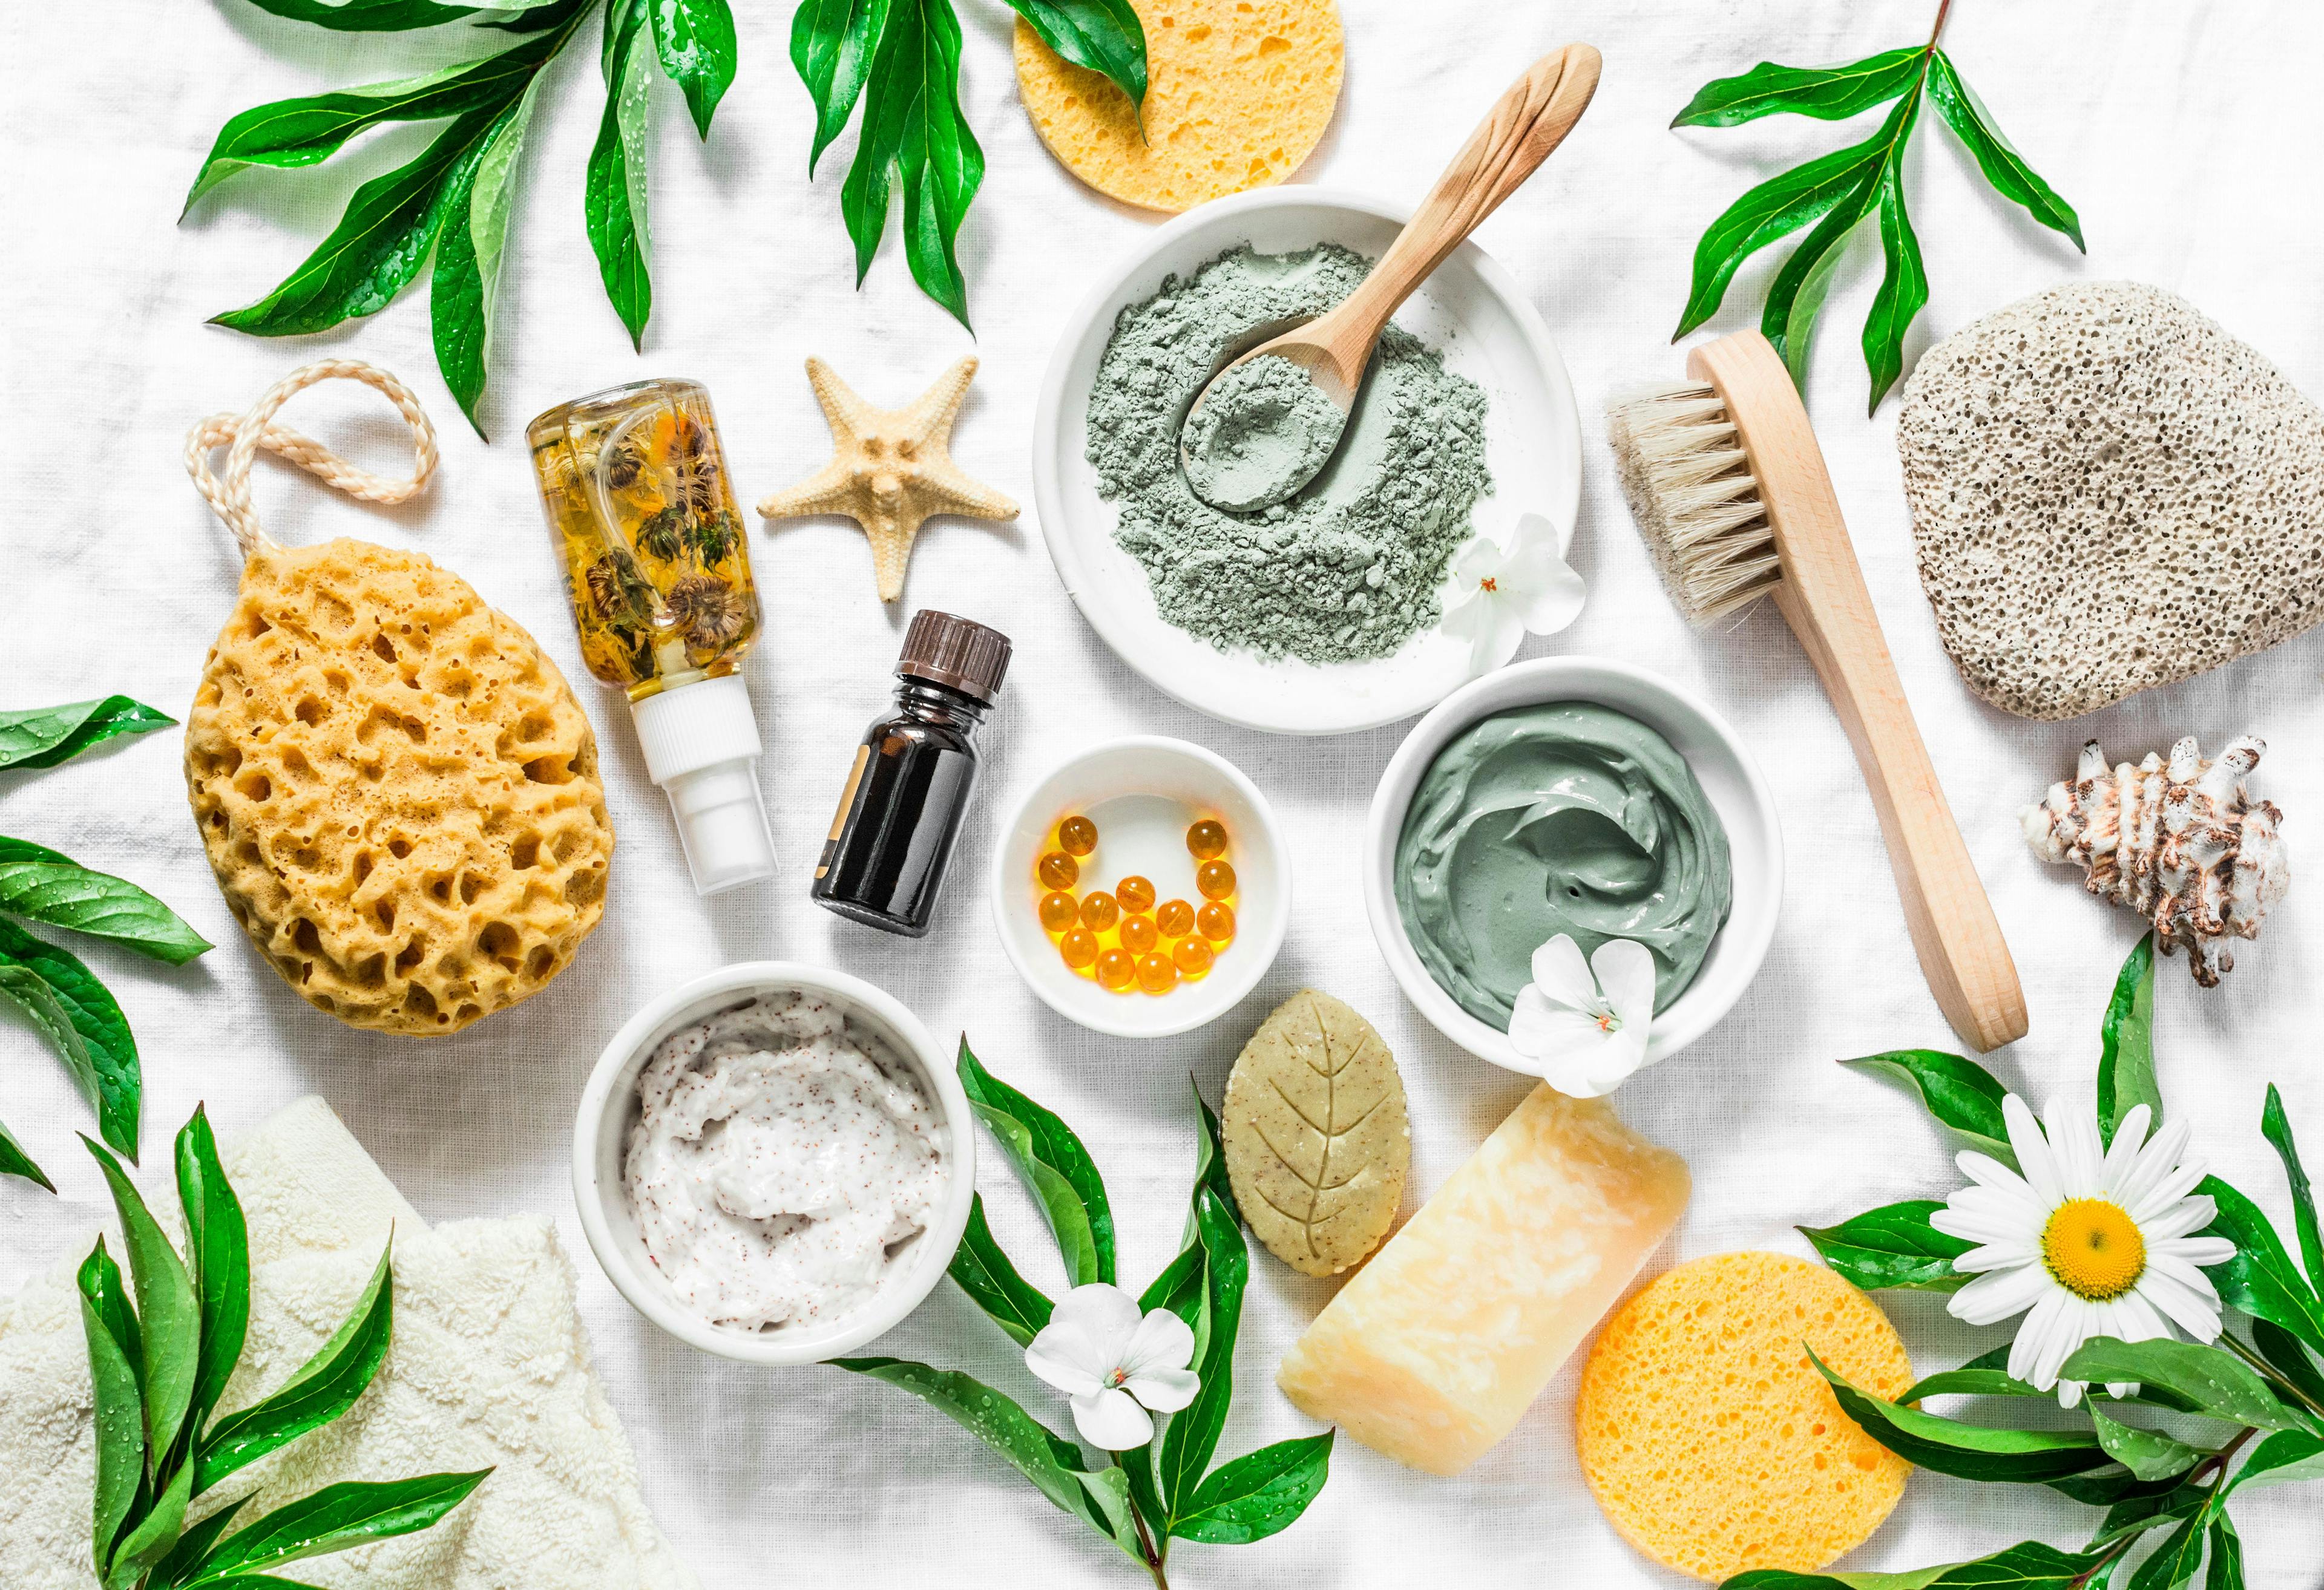 Dermatology Roundup: Skin Care in the Digital Age, The Gut-Skin Connection, and More